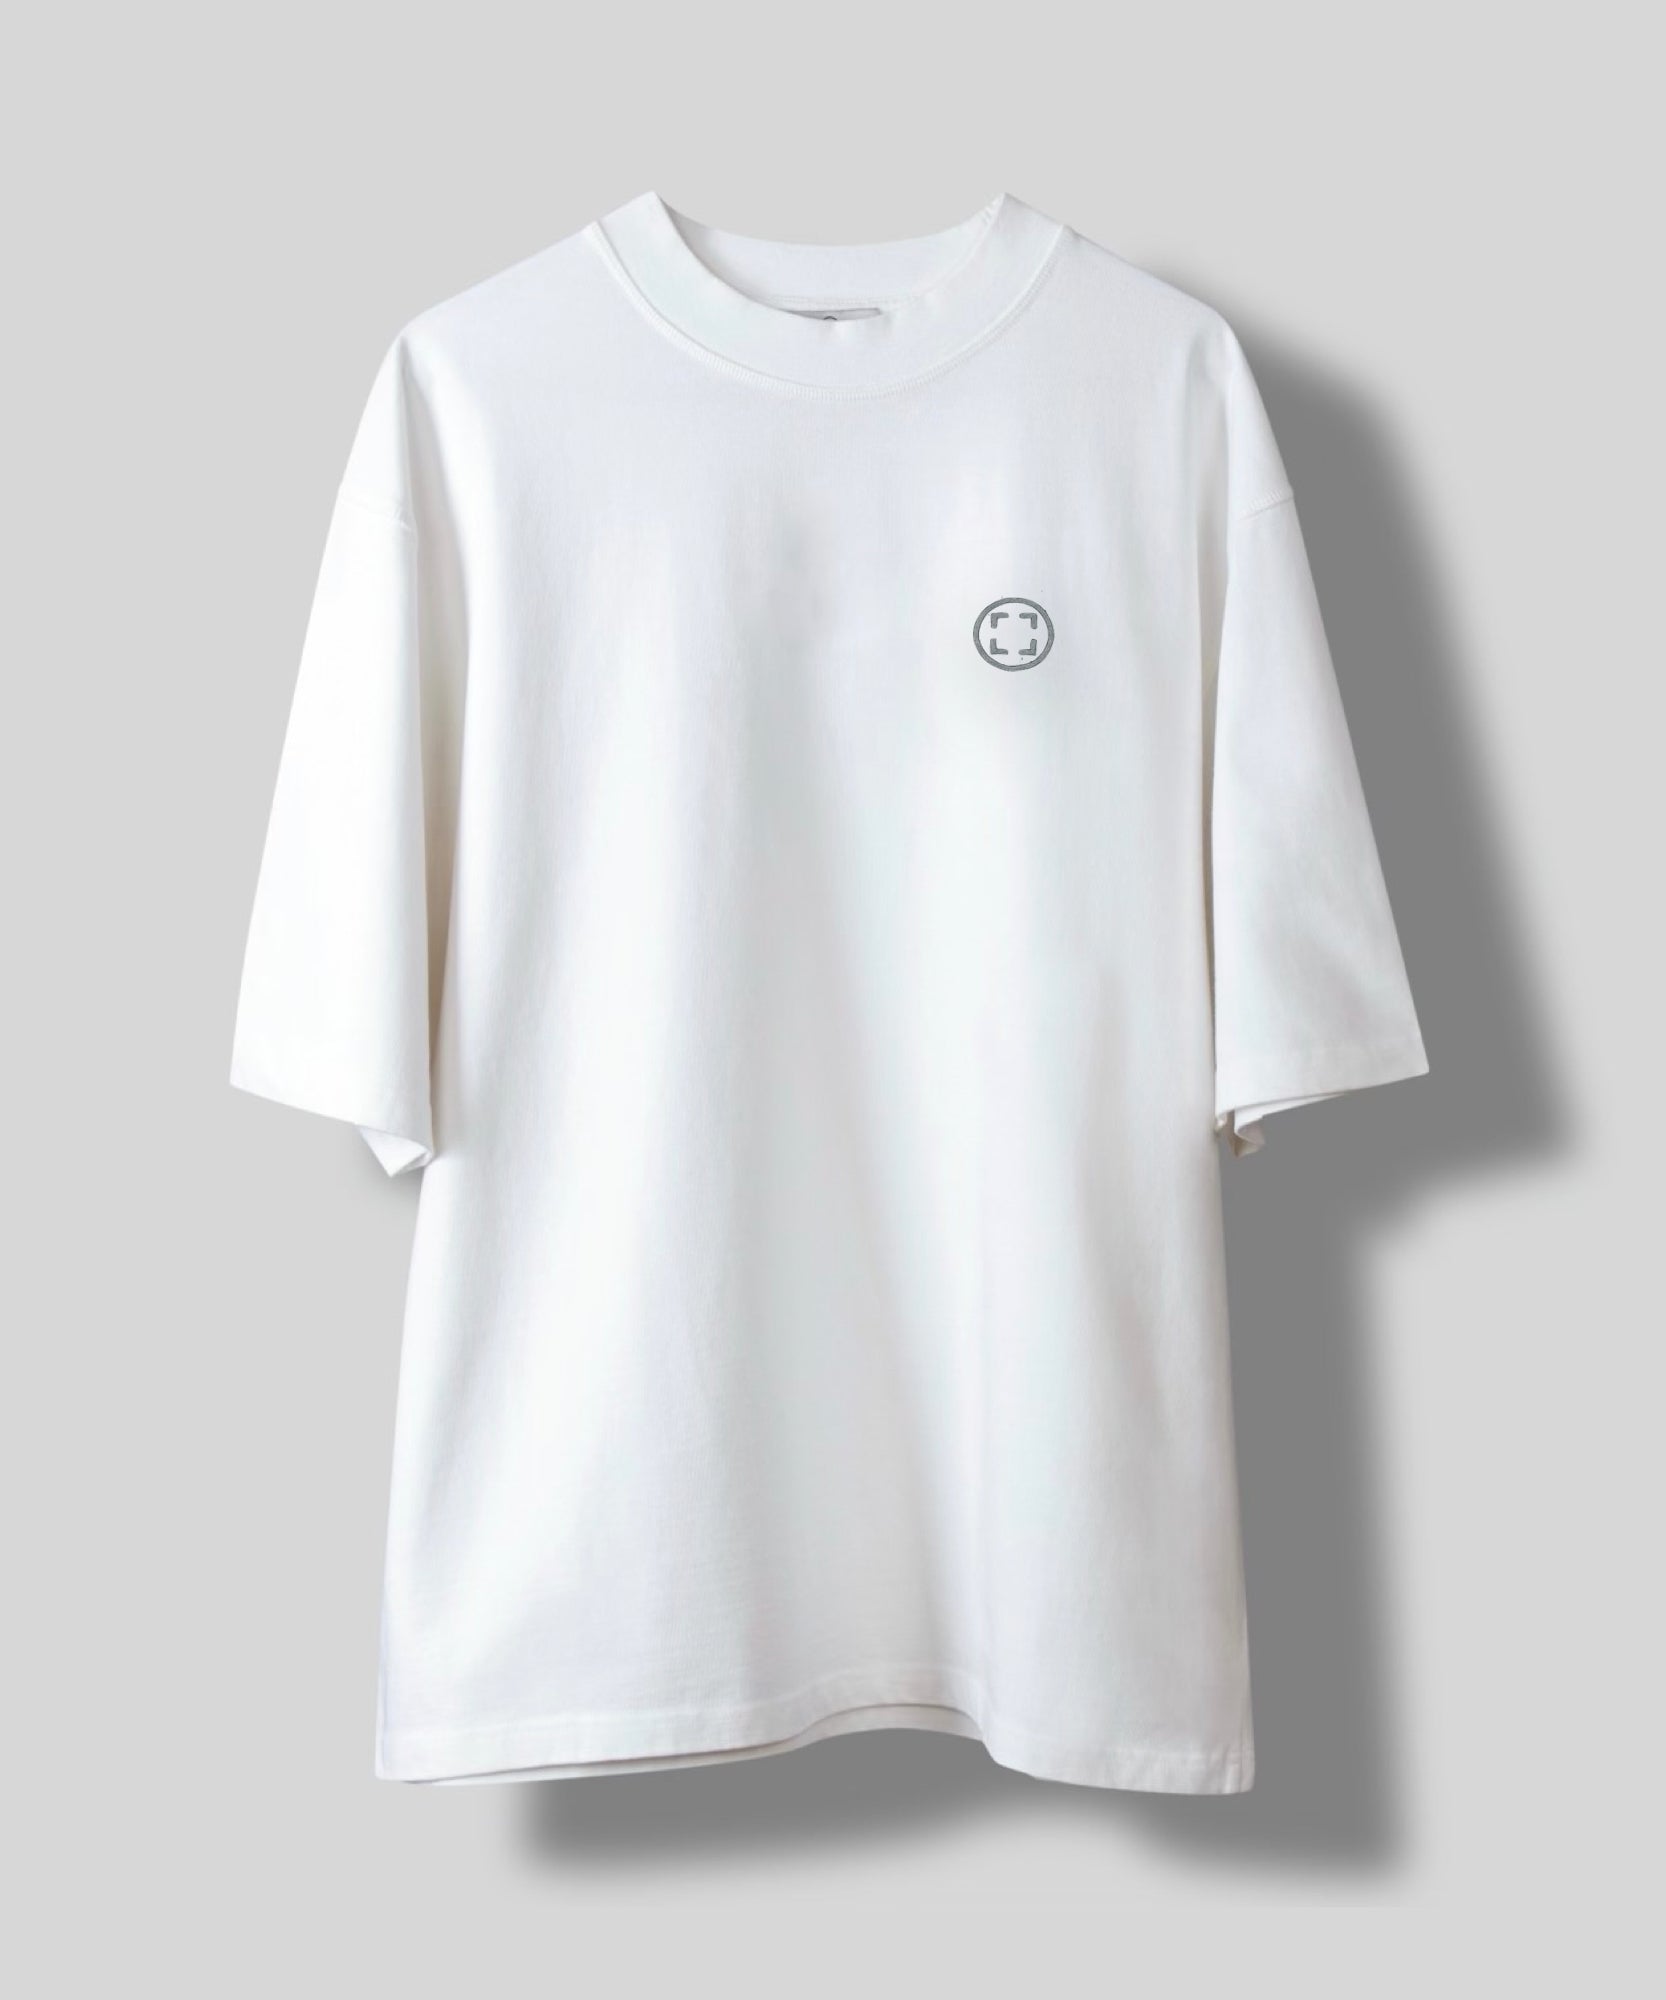 DOUBLE PACK OVERSIZE T-SHIRT "T5" MIX